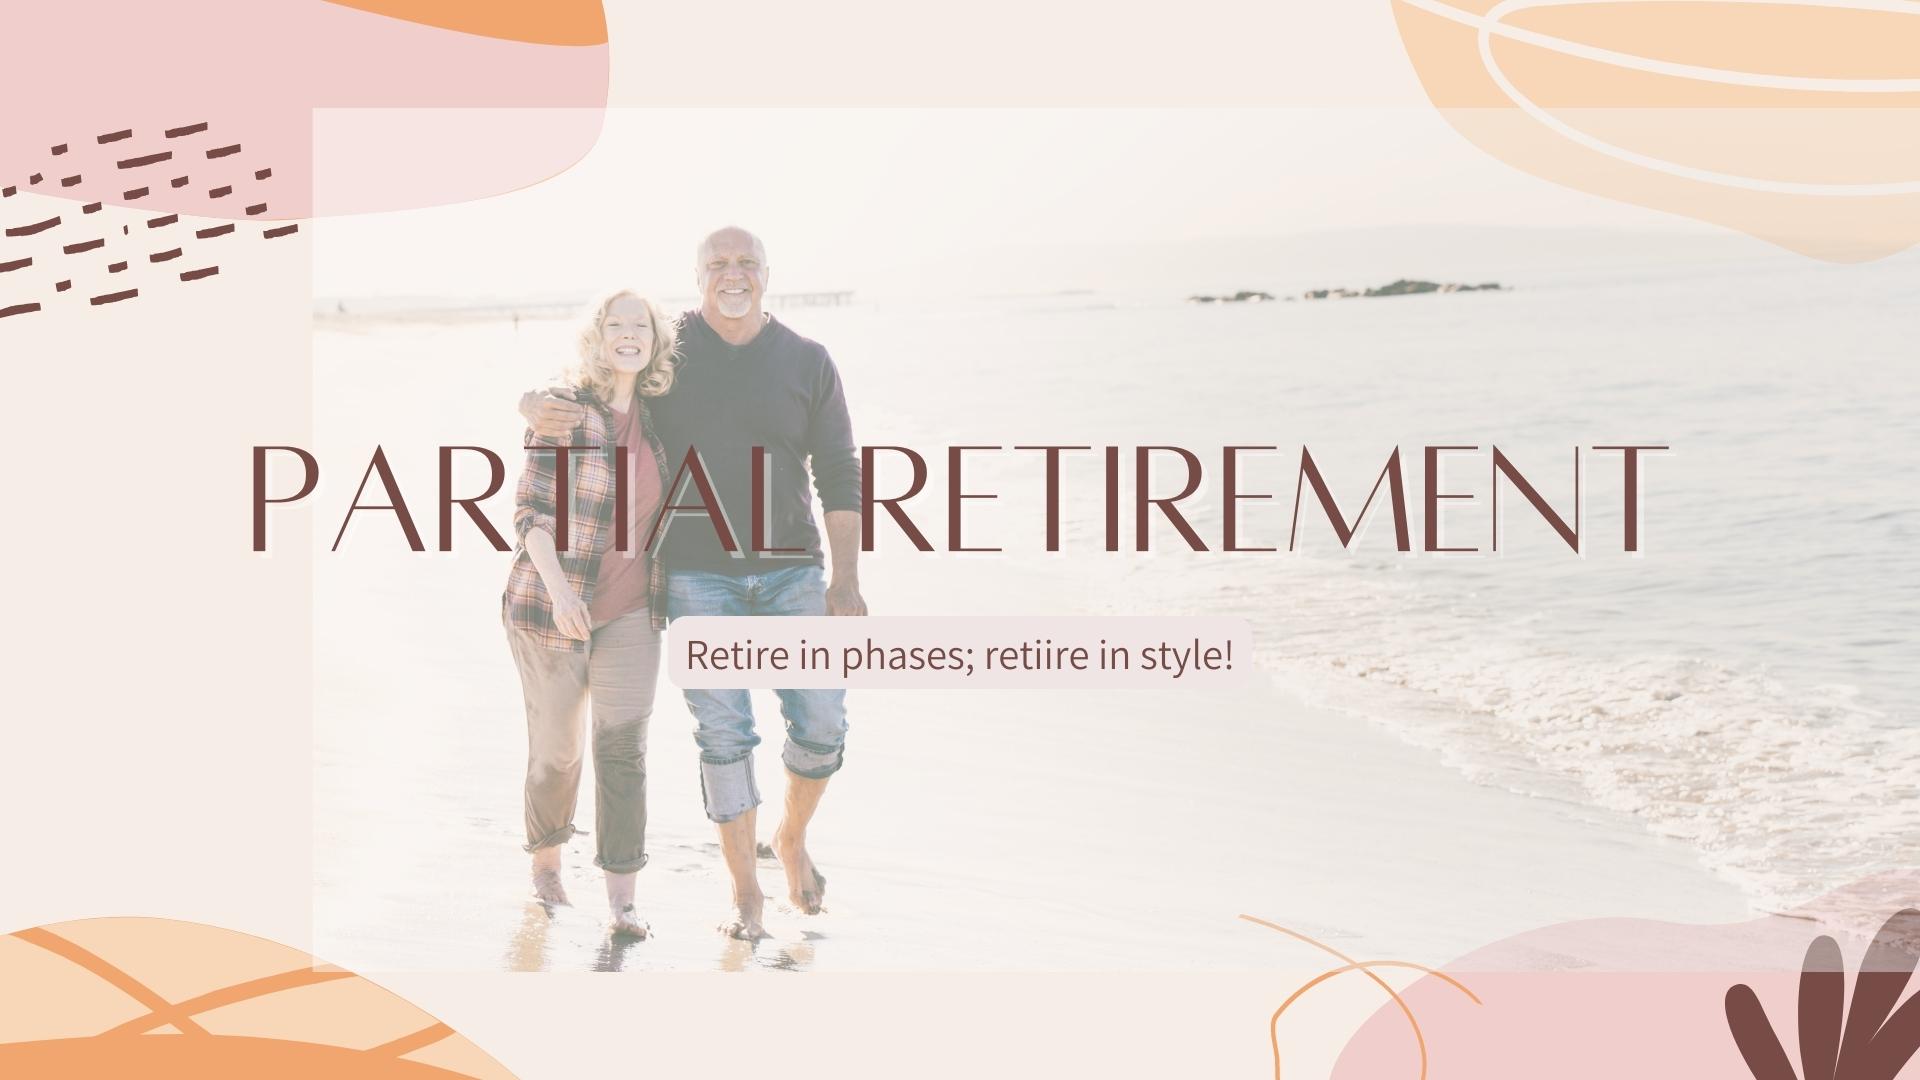 Partial Retirement: Retire in Phases, Retire in Style